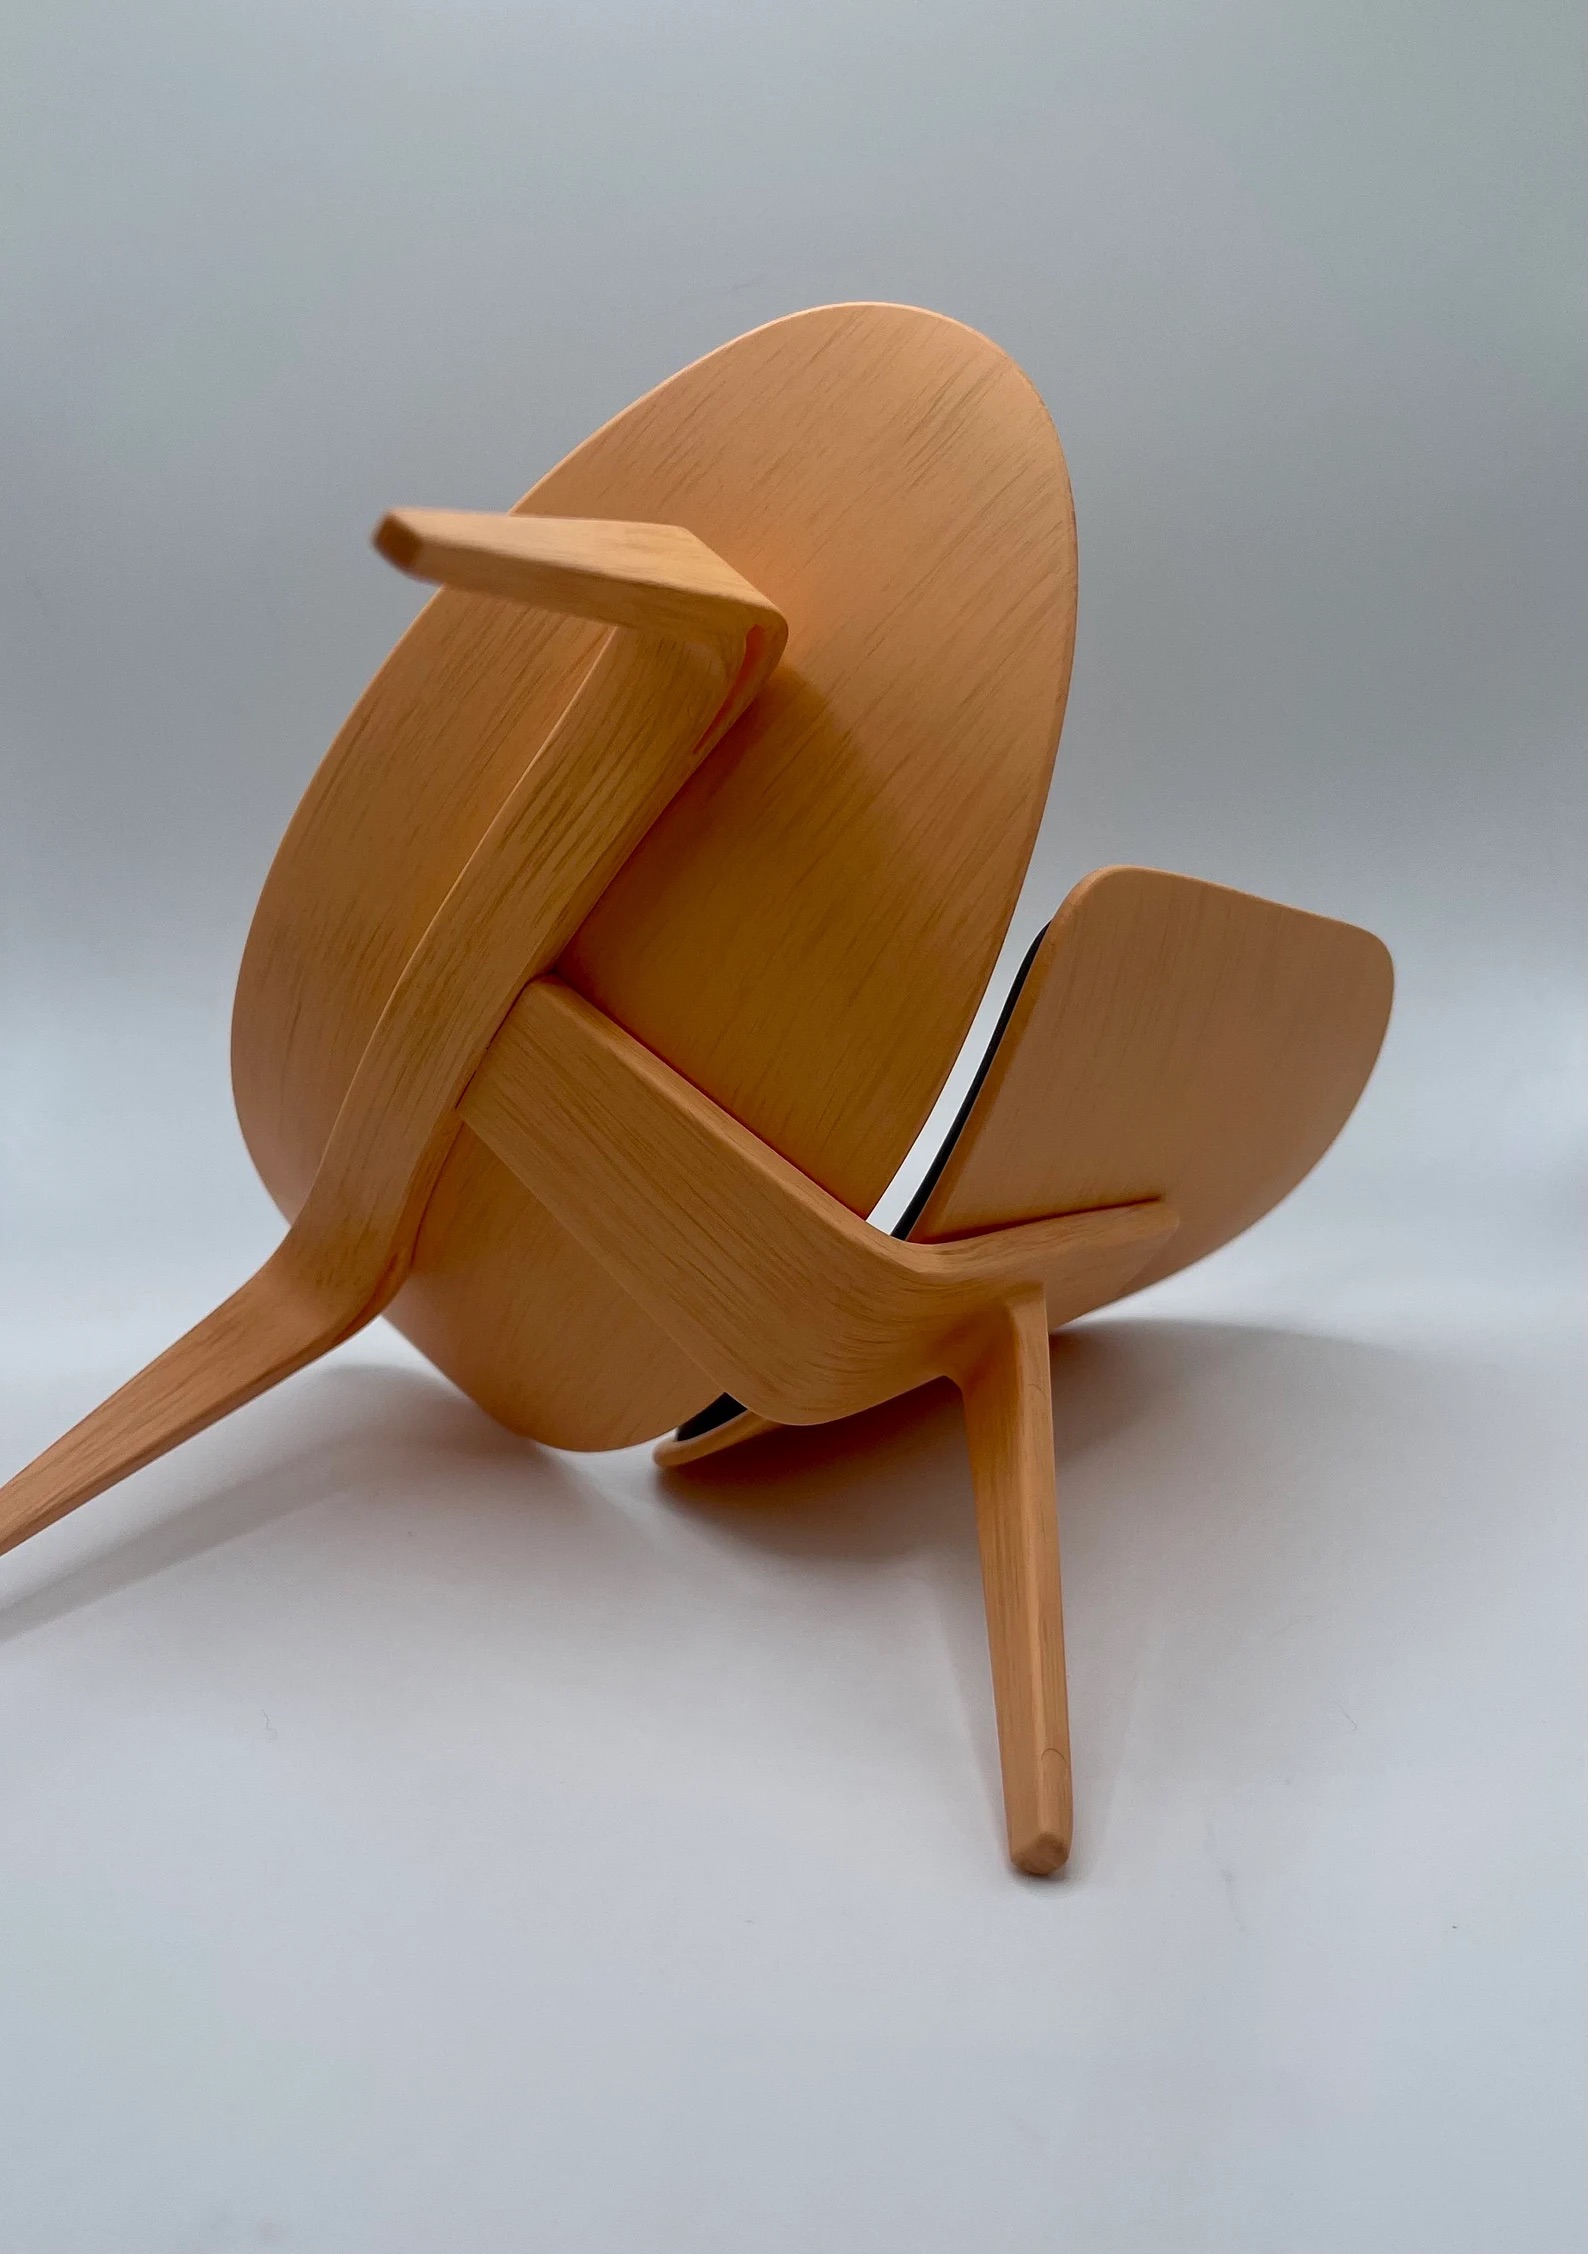 Three Hans Wegner Shell Chairs, Scale Model Desk Displays - Image 4 of 8